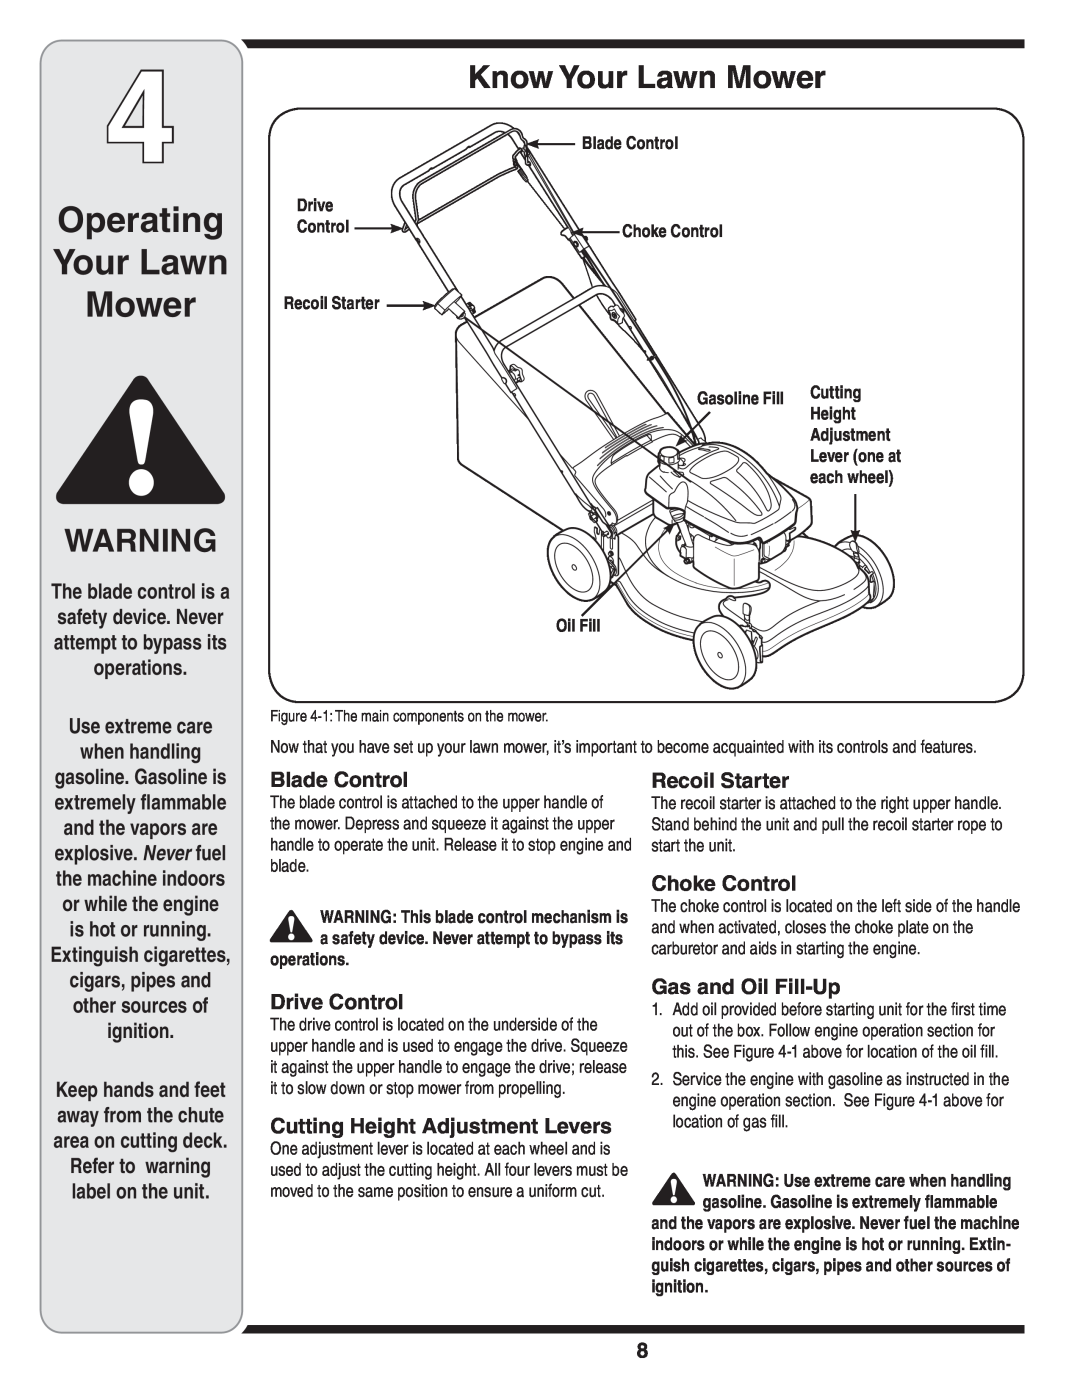 MTD 44M Operating Your Lawn Mower, Know Your Lawn Mower, Use extreme care when handling, Blade Control, Recoil Starter 